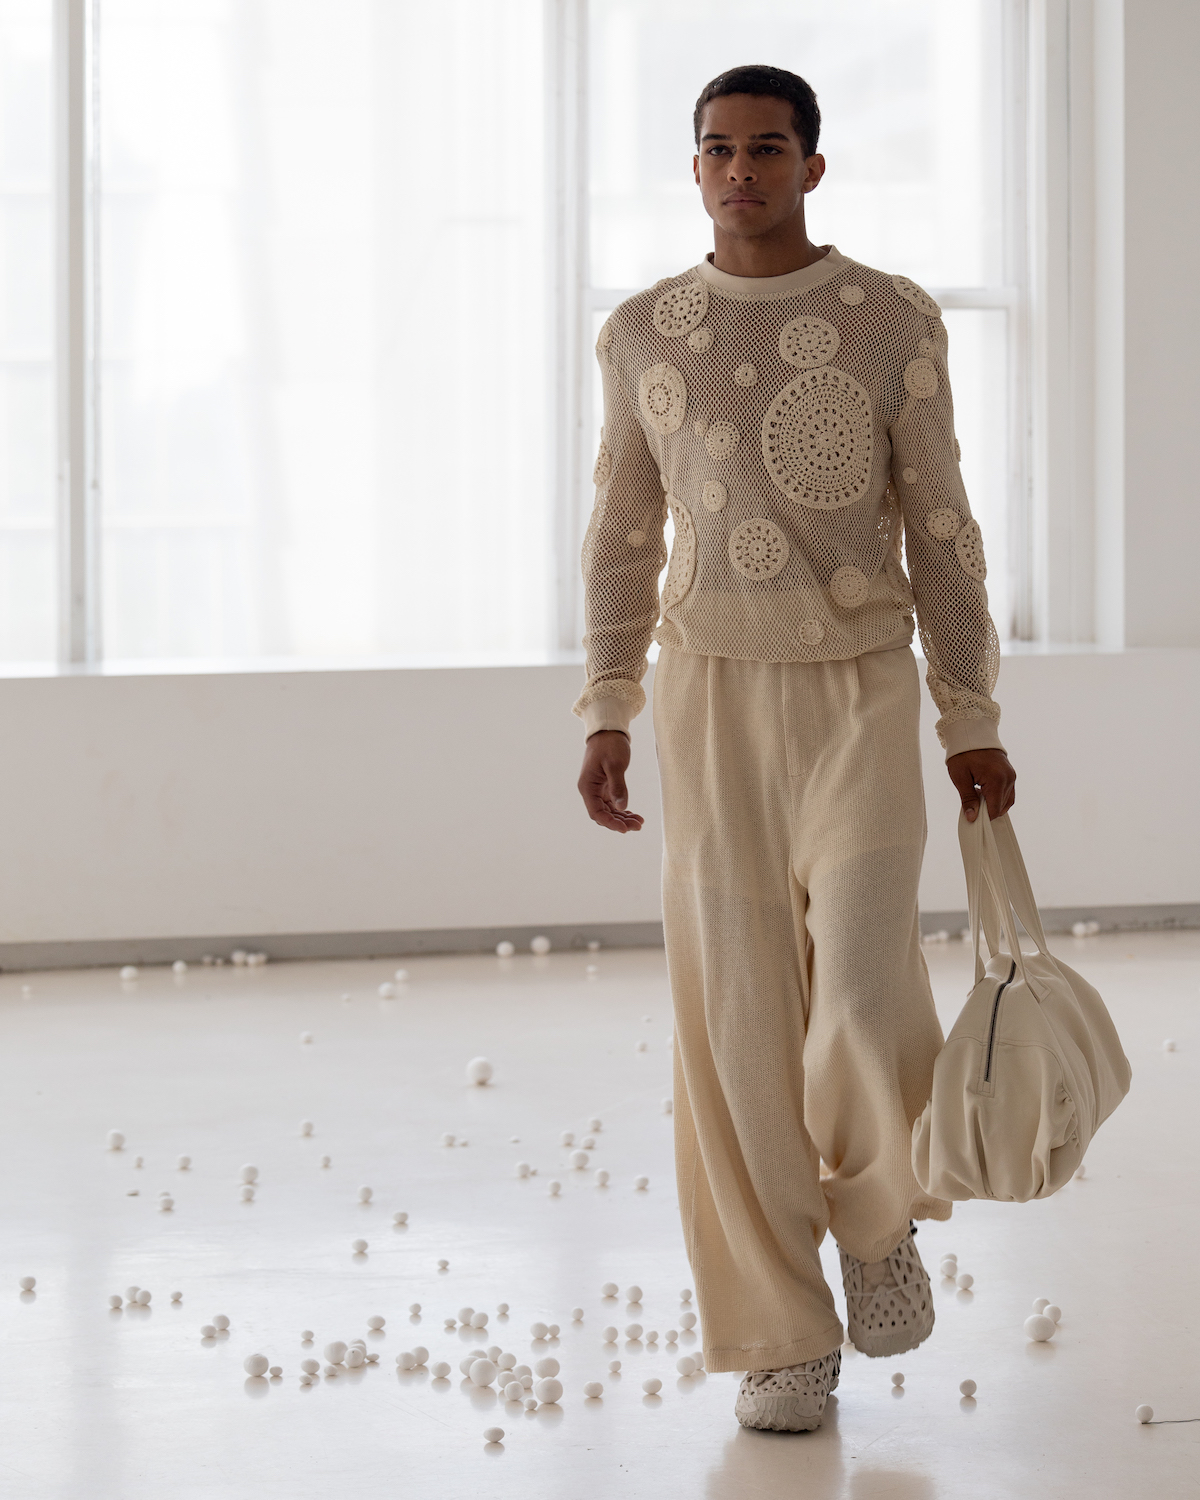 A model wearing a cream outfit with a cream bag walks towards the camera. The model is wearing clothes from CLARA SON.